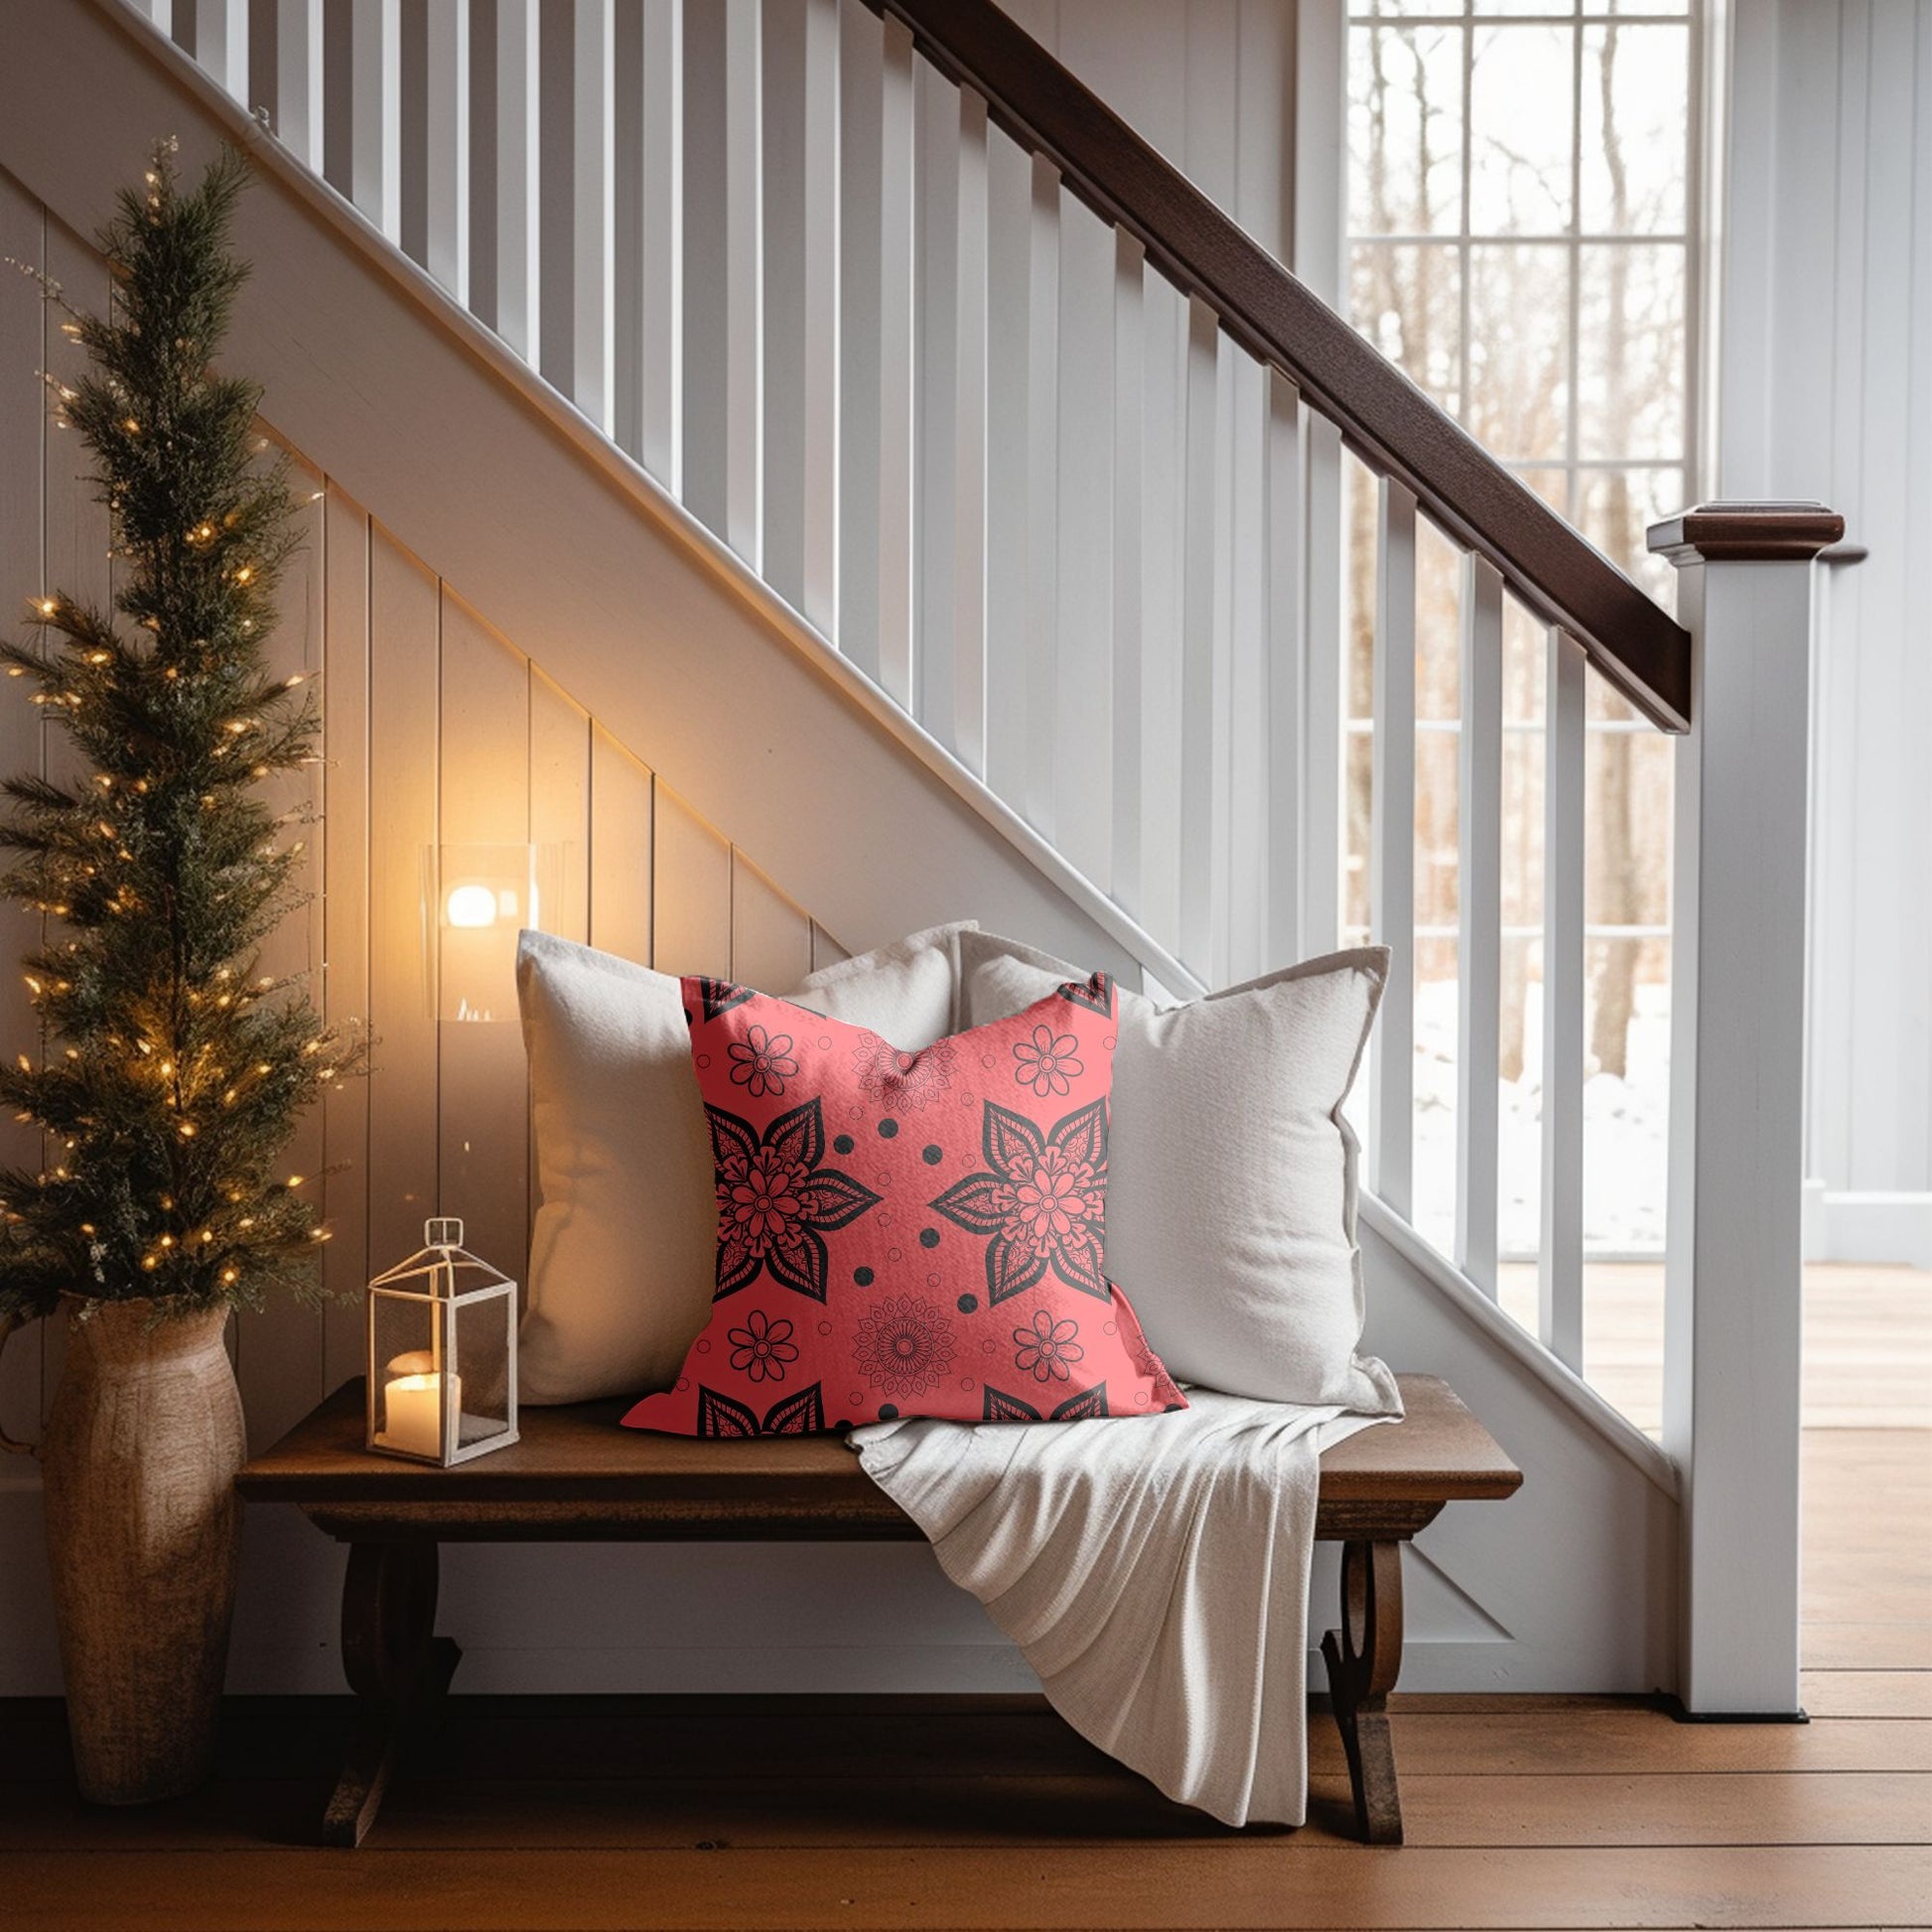 Holiday Joy Red Throw Pillow with Sparkling Ornaments